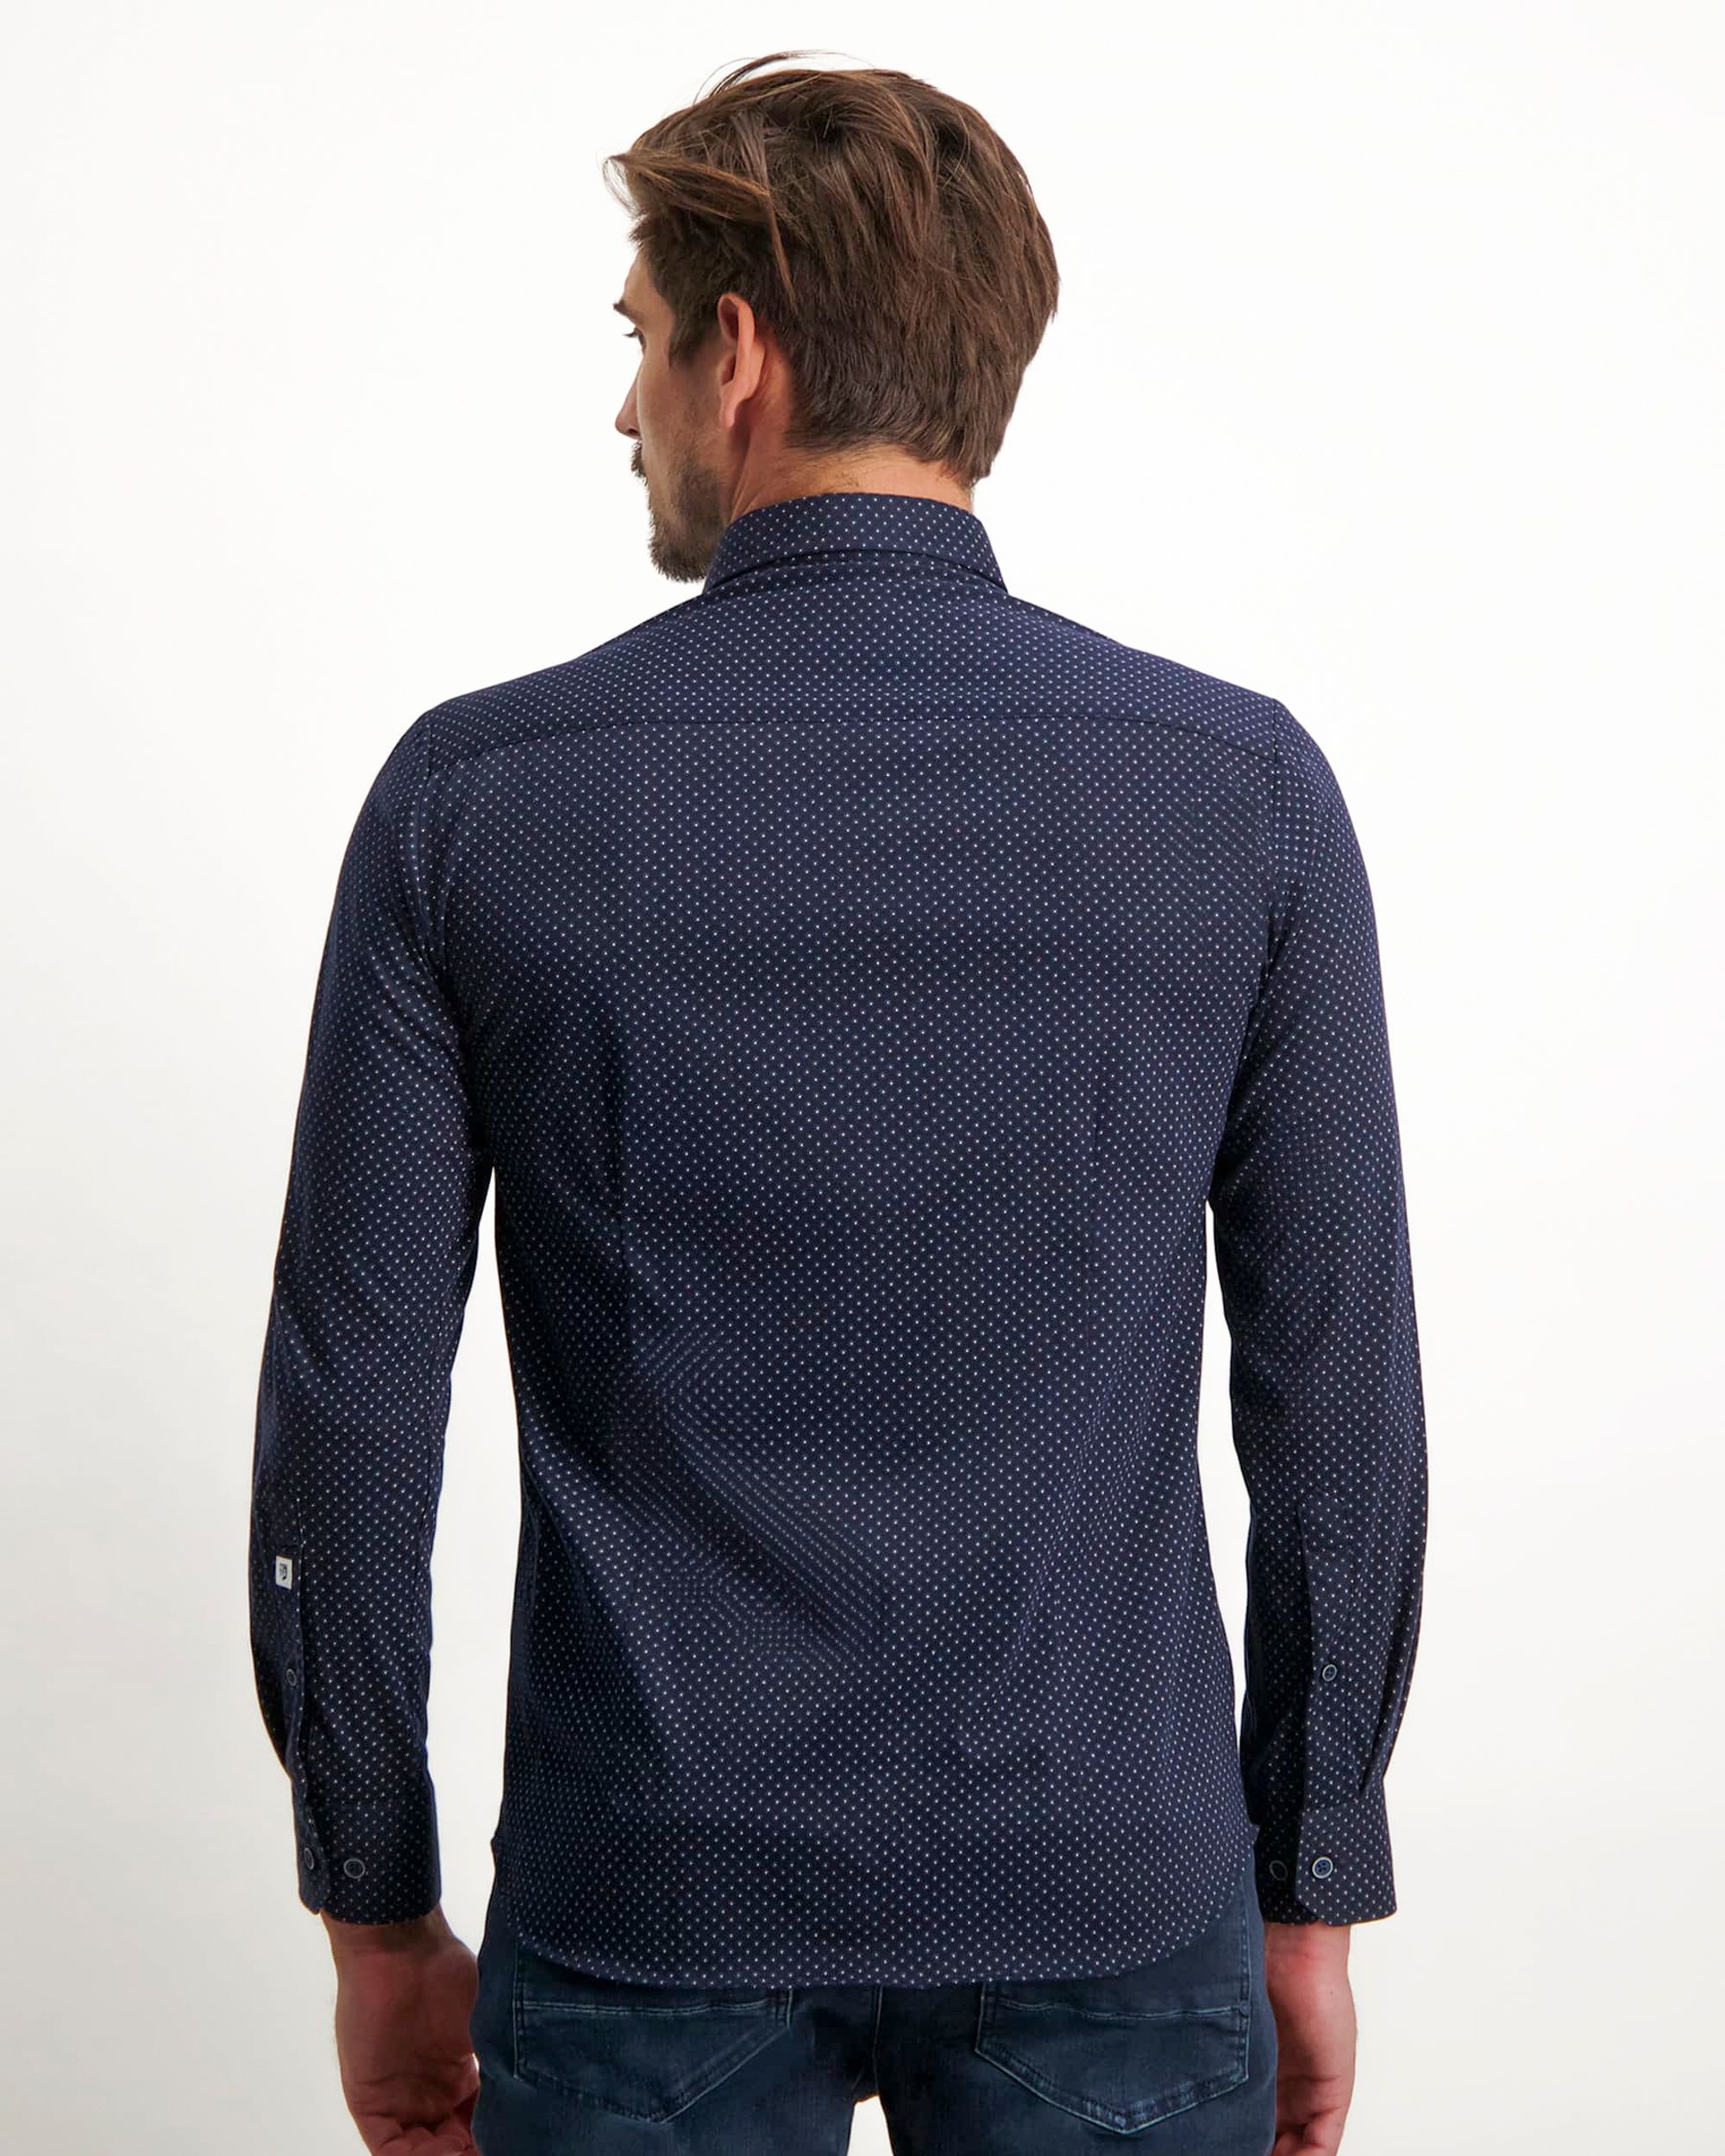 State of Art Casual Overhemd LM Blauw 081160-001-4XL